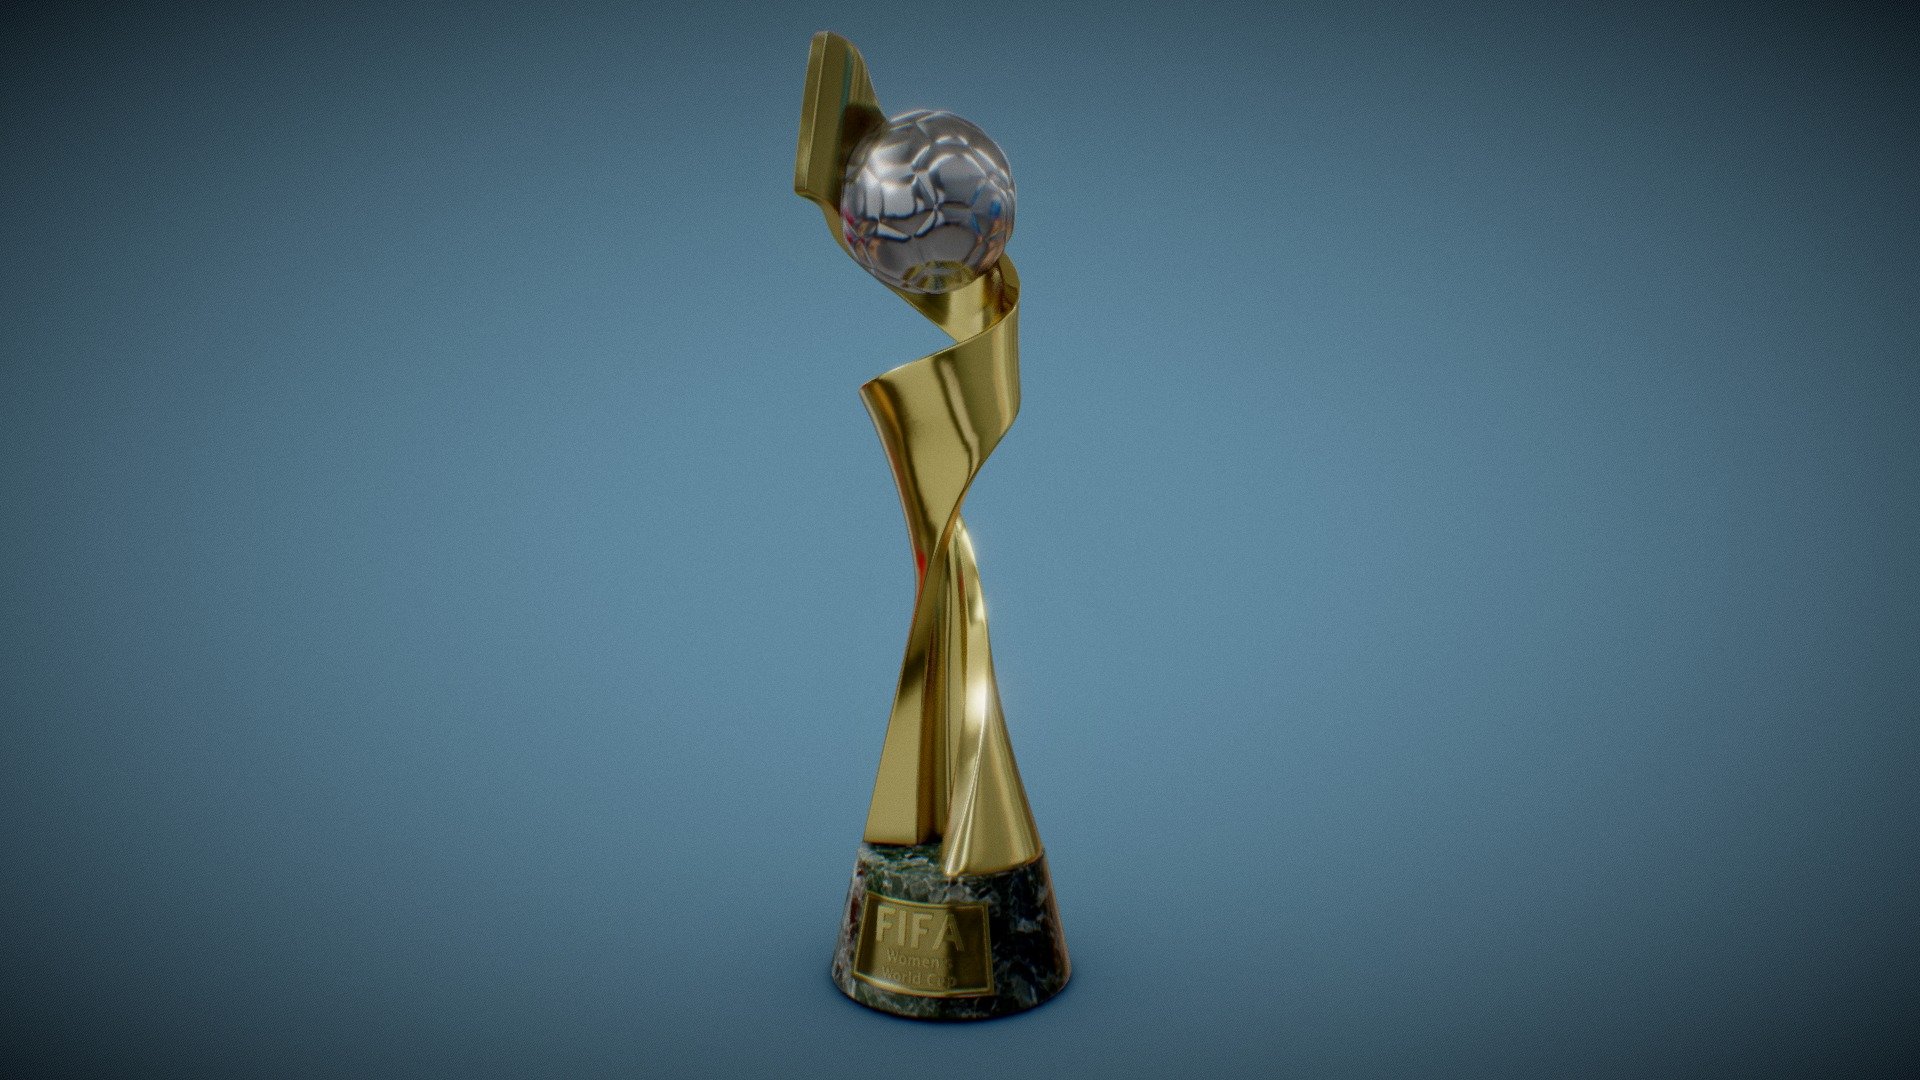 An Accurate Model of The FIFA Woman World Cup Trophy

High poly sculpt ,3D Printing STL file, and low poly verstion are all included in the Additional files

High Quality 8K PBR textures

Perfect for any Purpose - FIFA Woman's World Cup Trophy - Buy Royalty Free 3D model by Deftroy 3d model